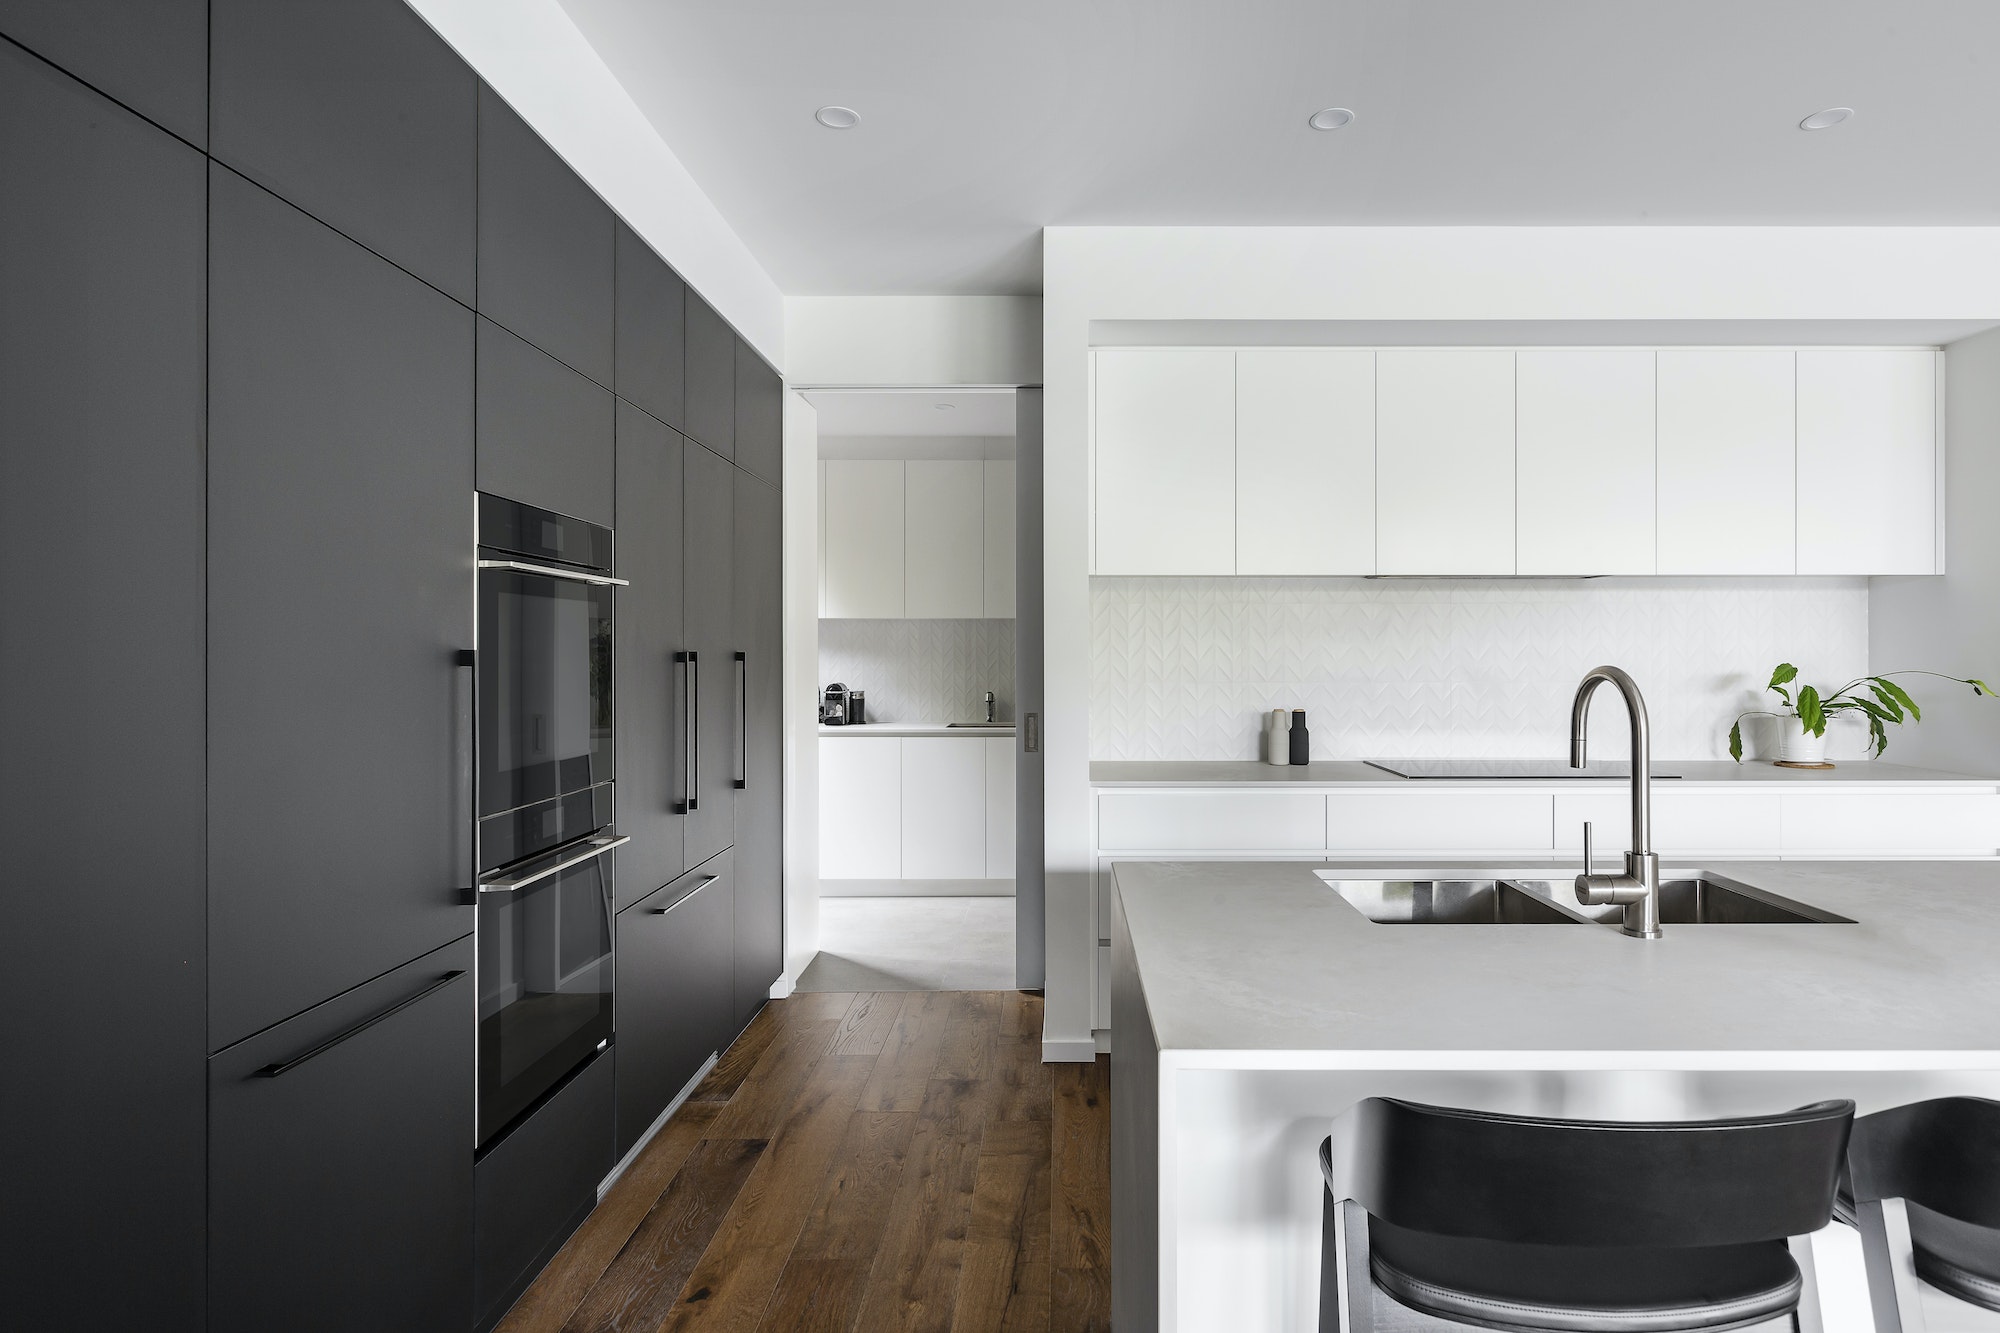 10 Ultra-Modern And Shiny Kitchen Design Ideas To Inspire You